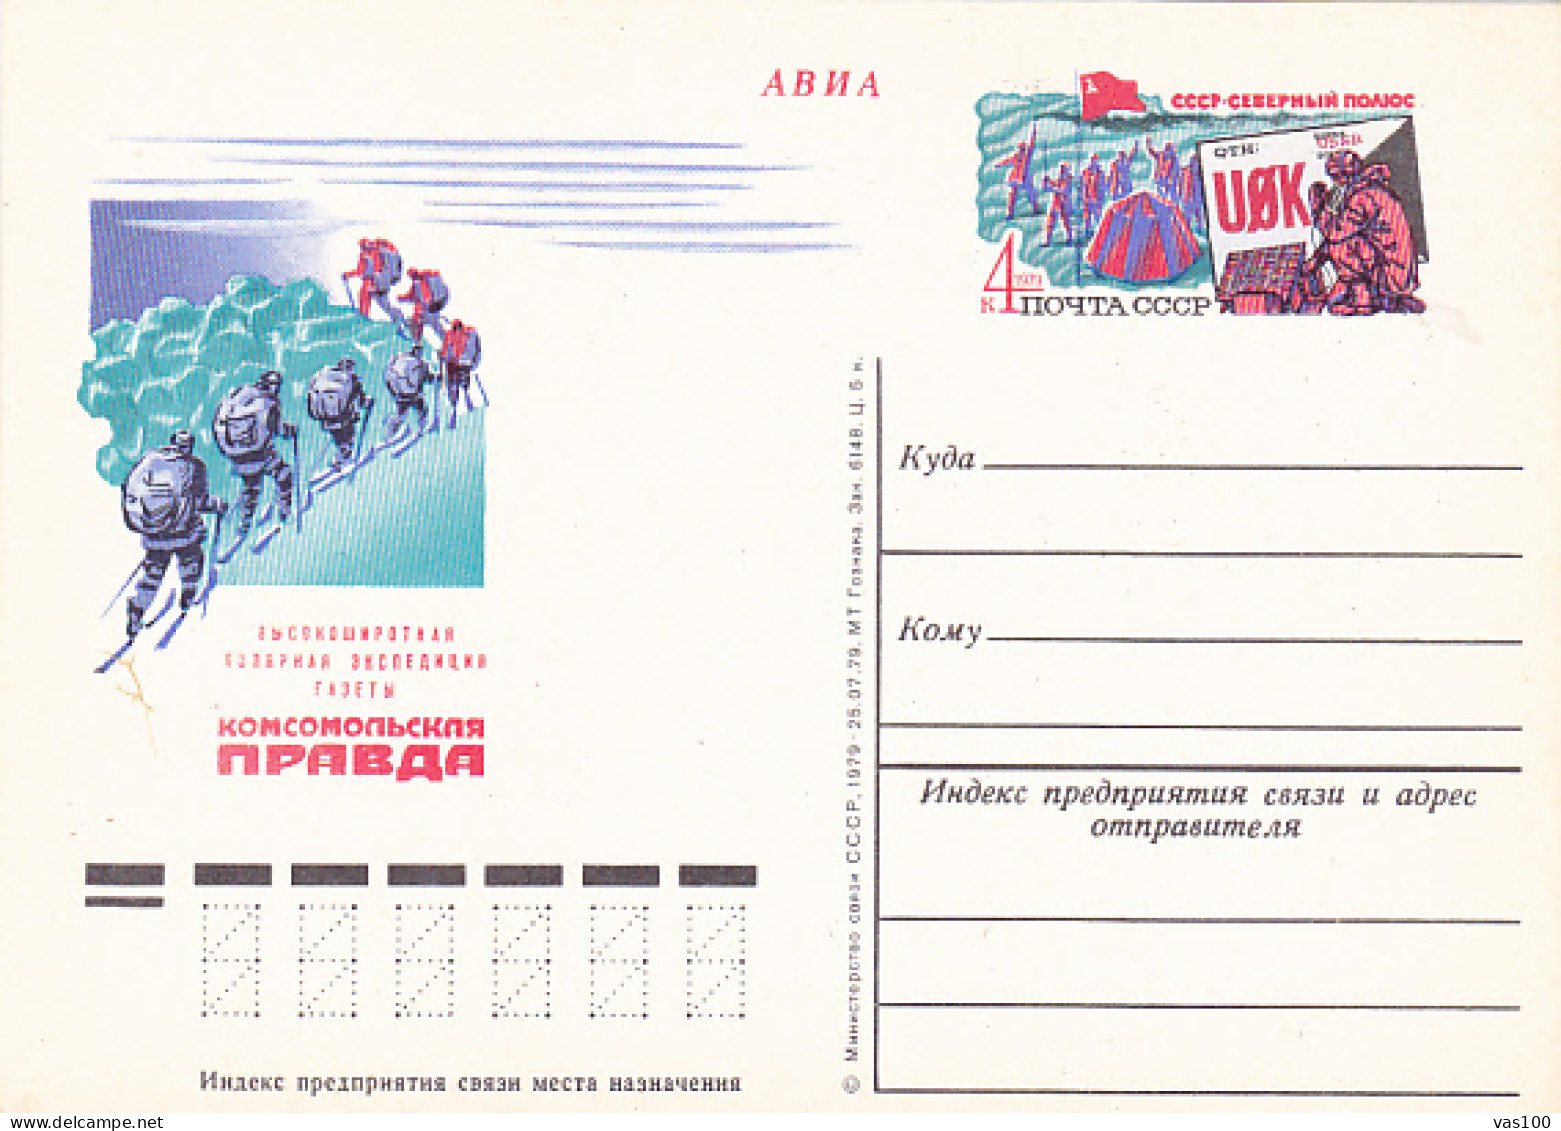 NORTH POLE, PRAVDA NEWSPAPER RUSSIAN ARCTIC EXPEDITION, PC STATIONERY, ENTIER POSTAL, 1979, RUSSIA - Expéditions Arctiques